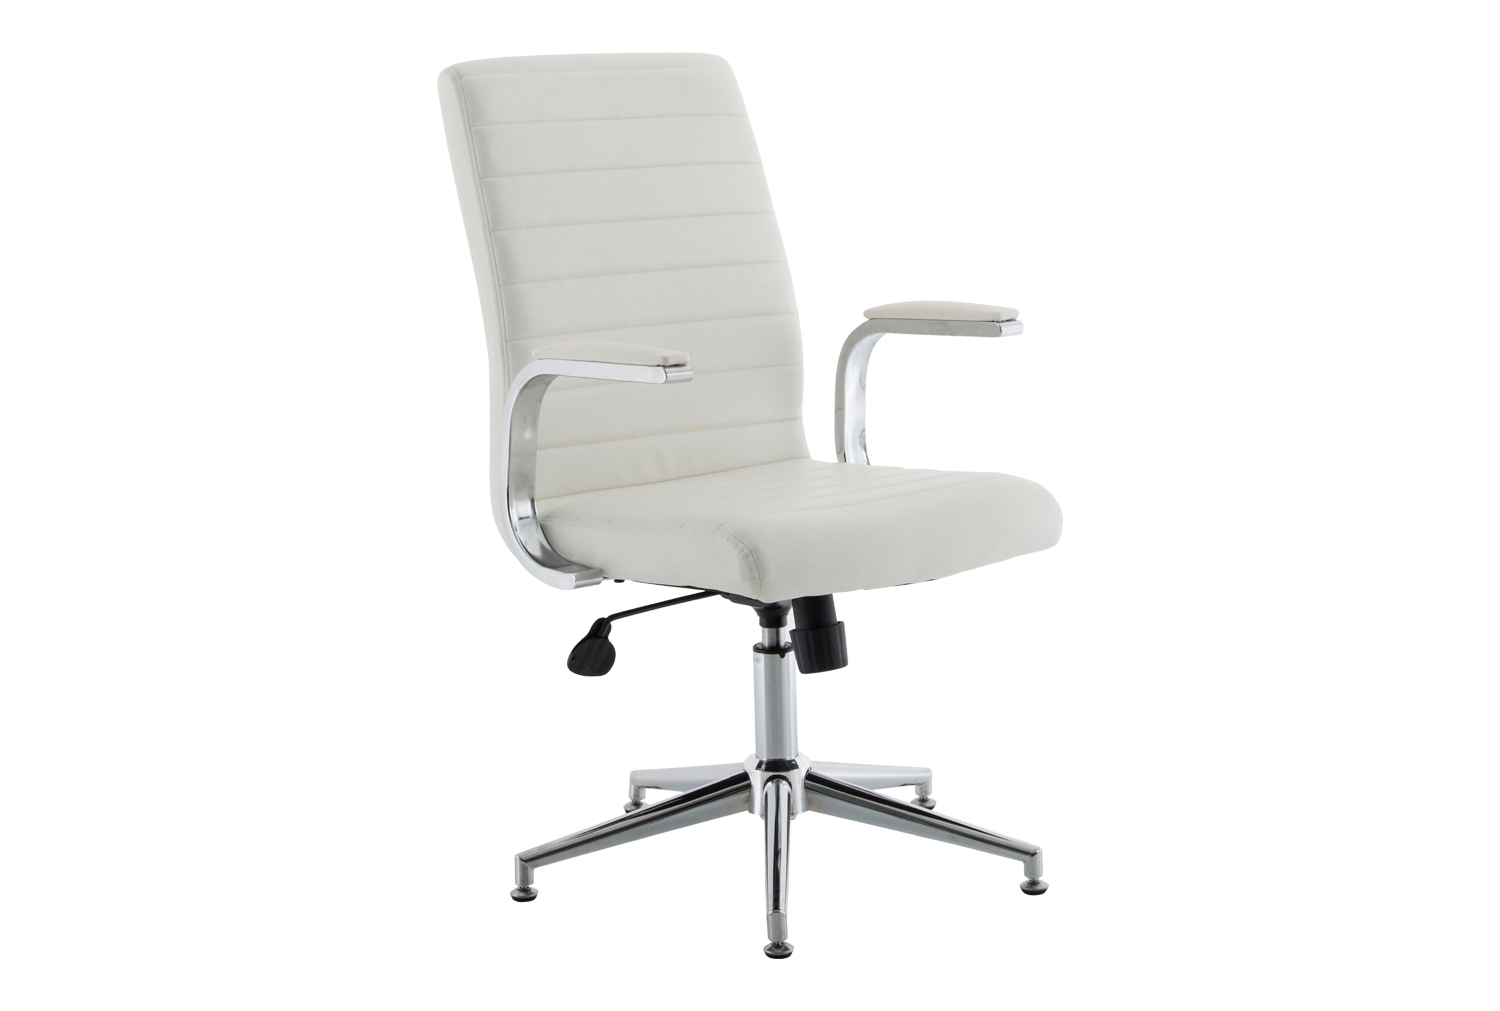 Wexford Executive Bonded Leather Office Chair With Glides (White)